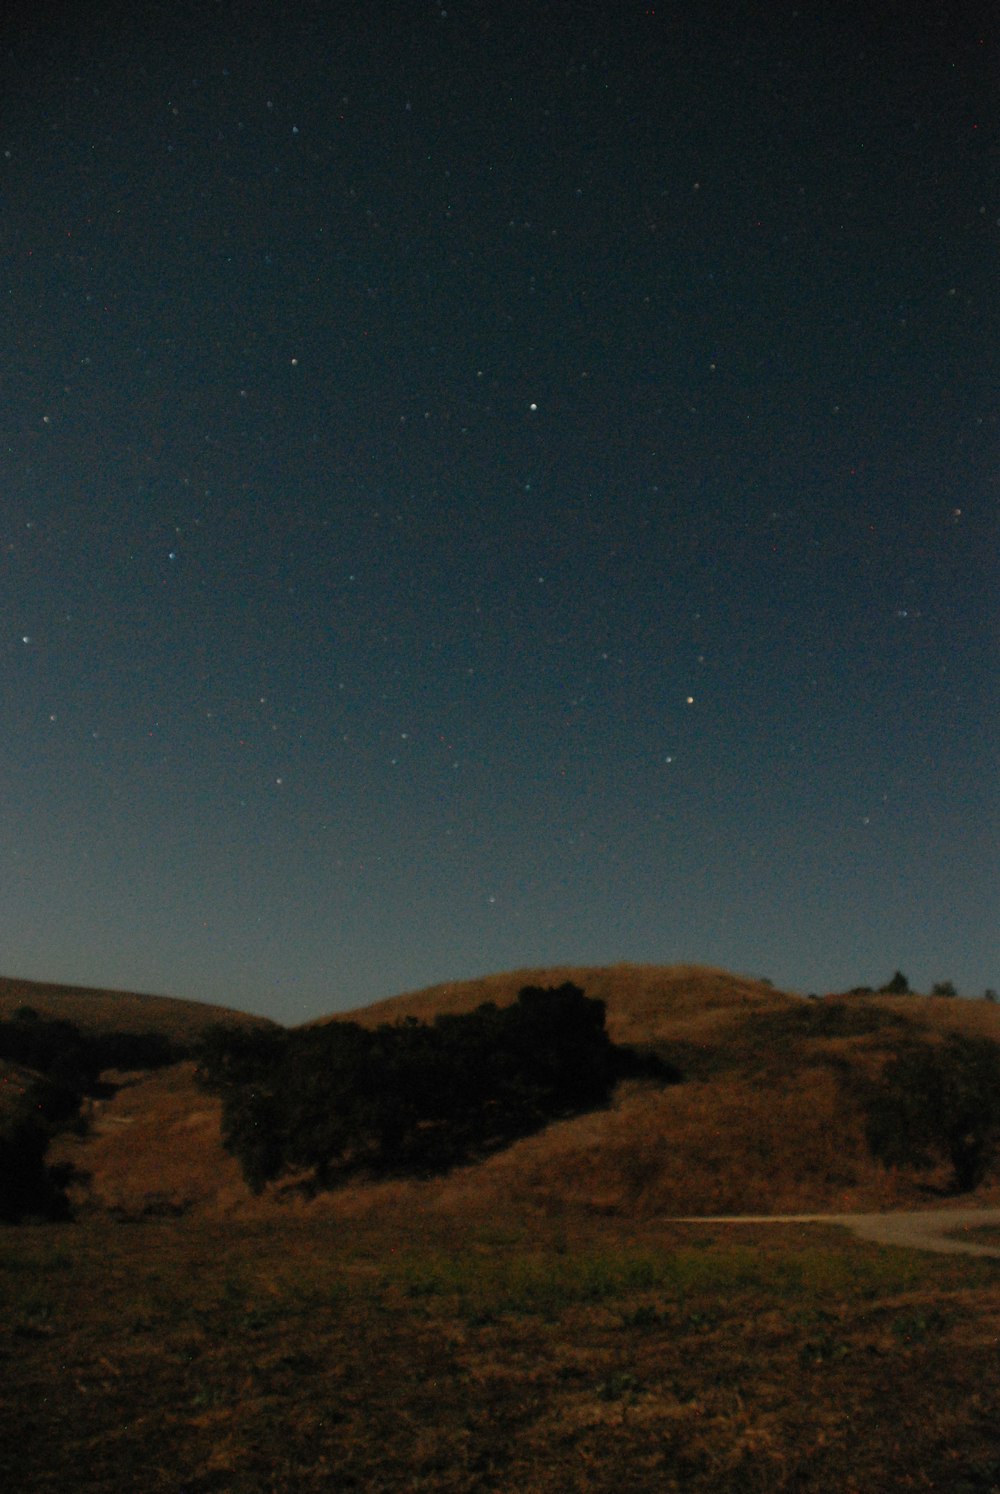 the night sky is full of stars above a grassy hill